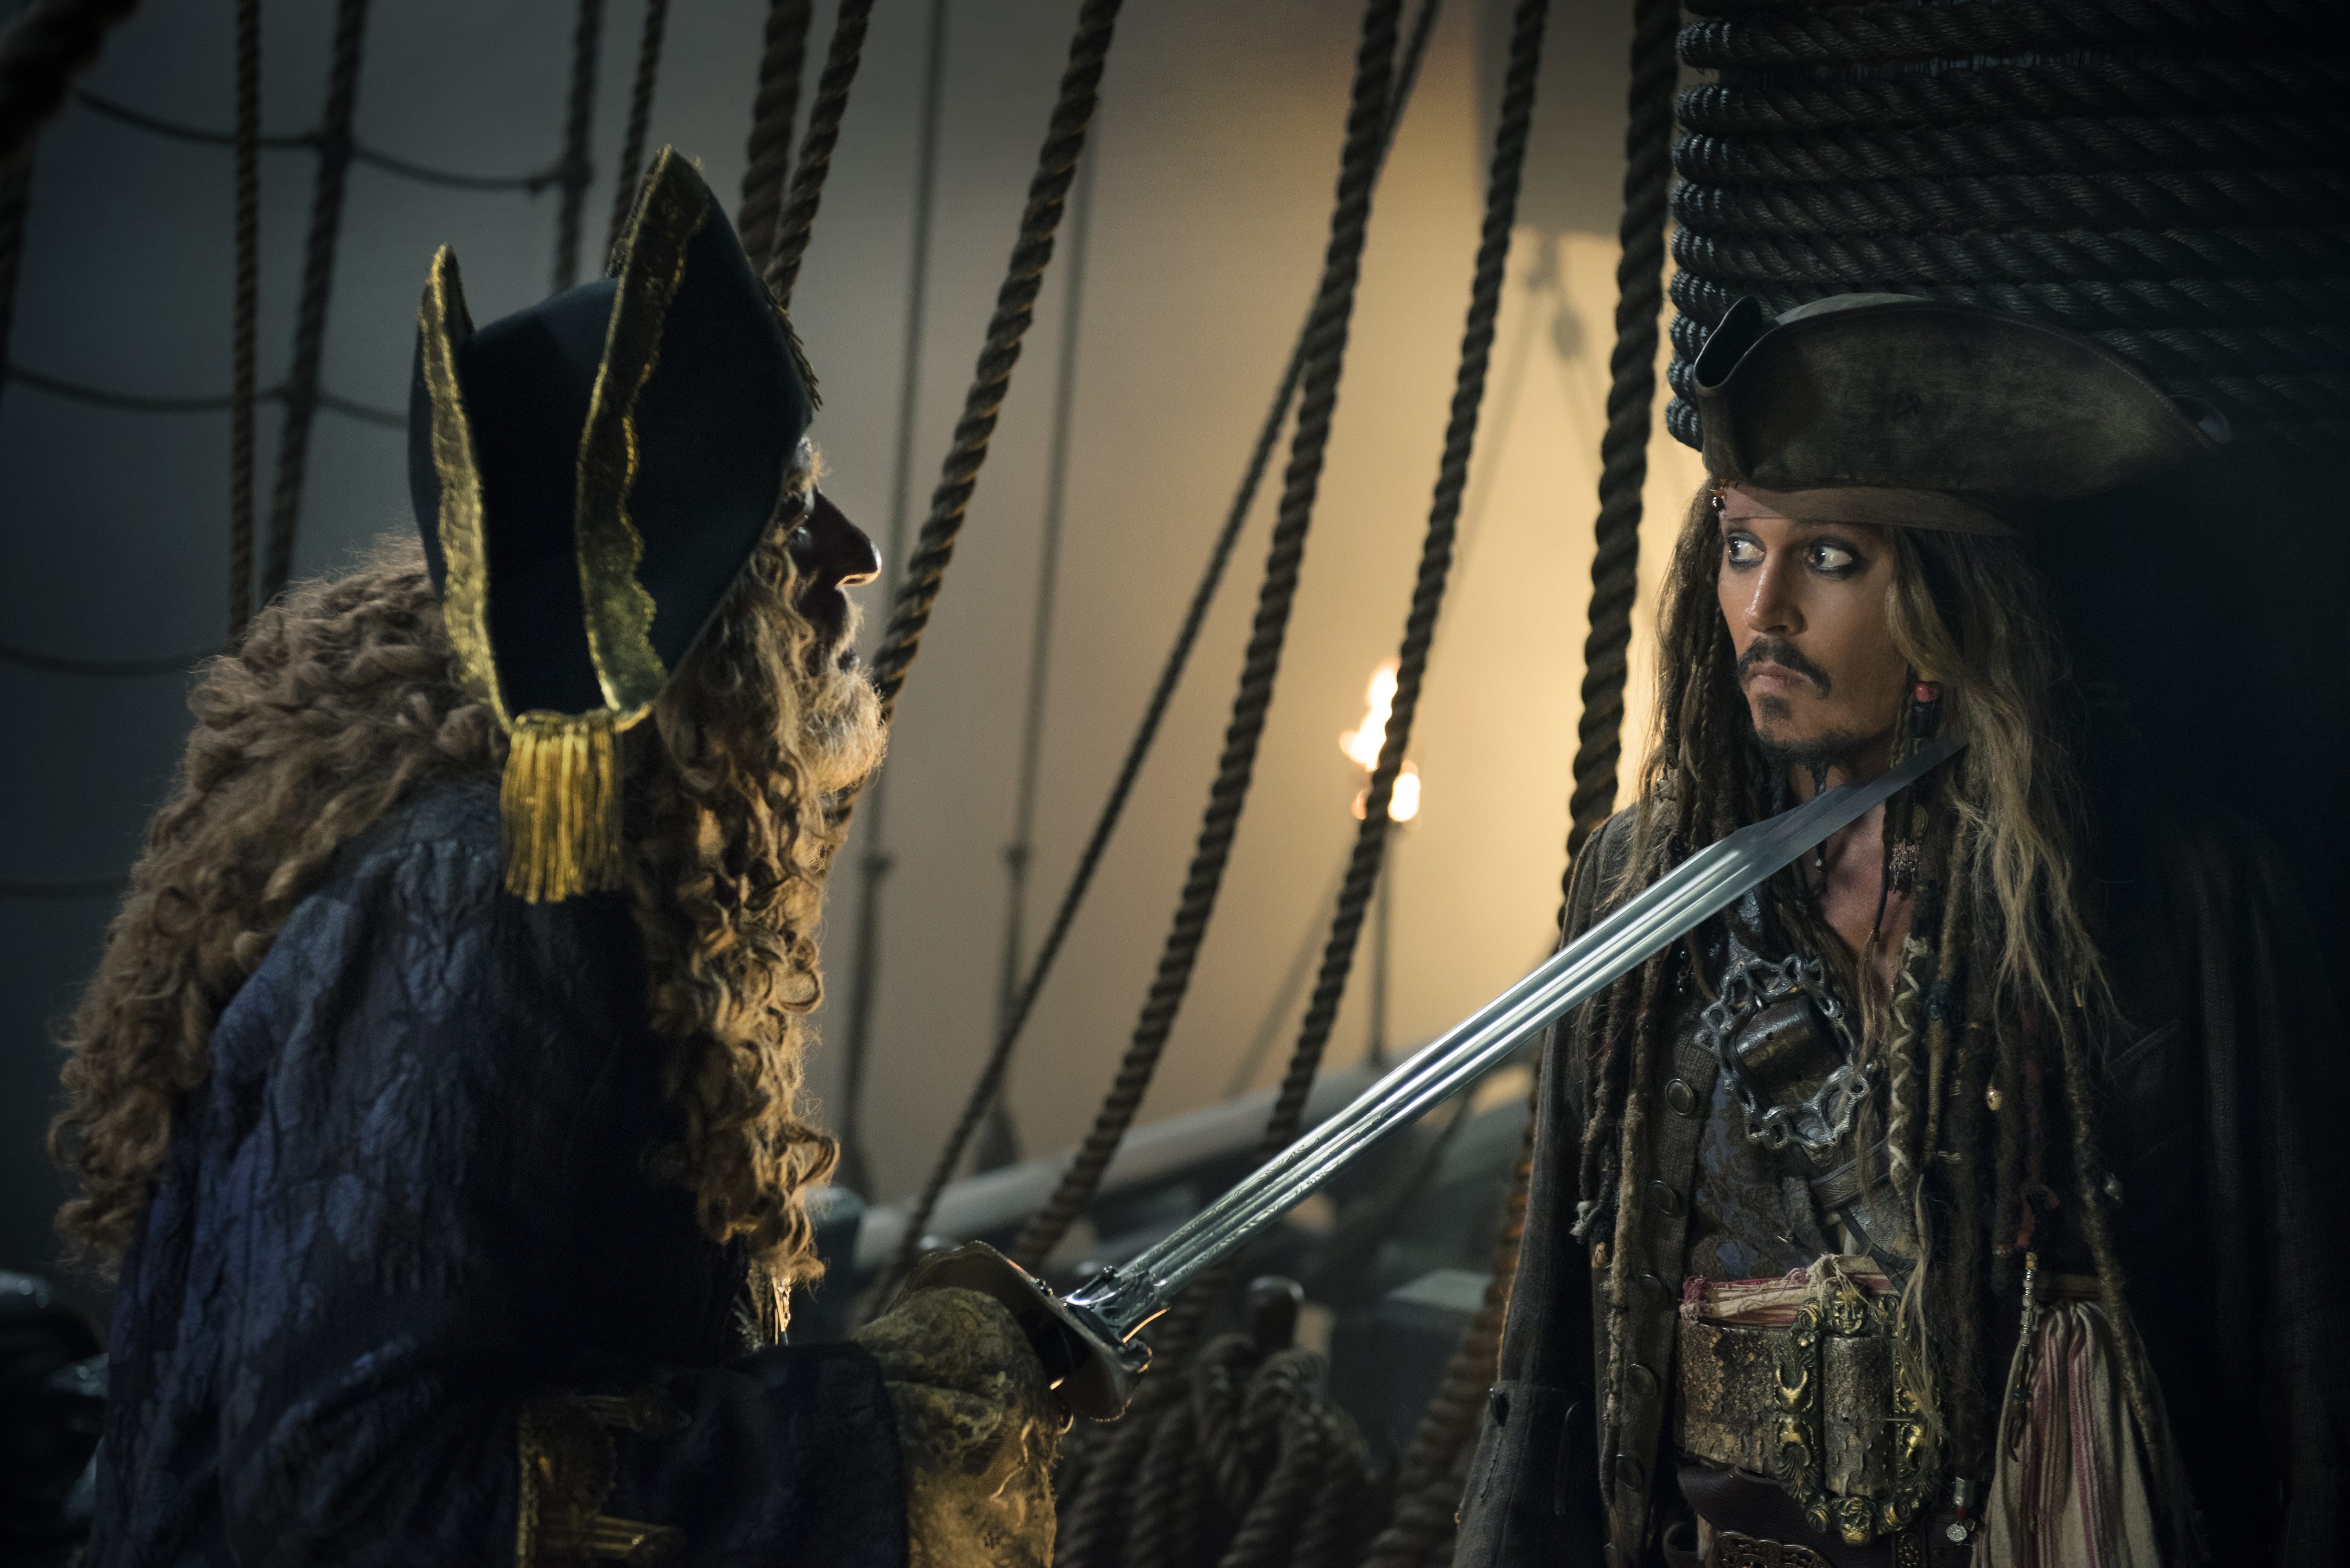 Pirates of the Caribbean: Dead Men Tell No Tales, movies, one person